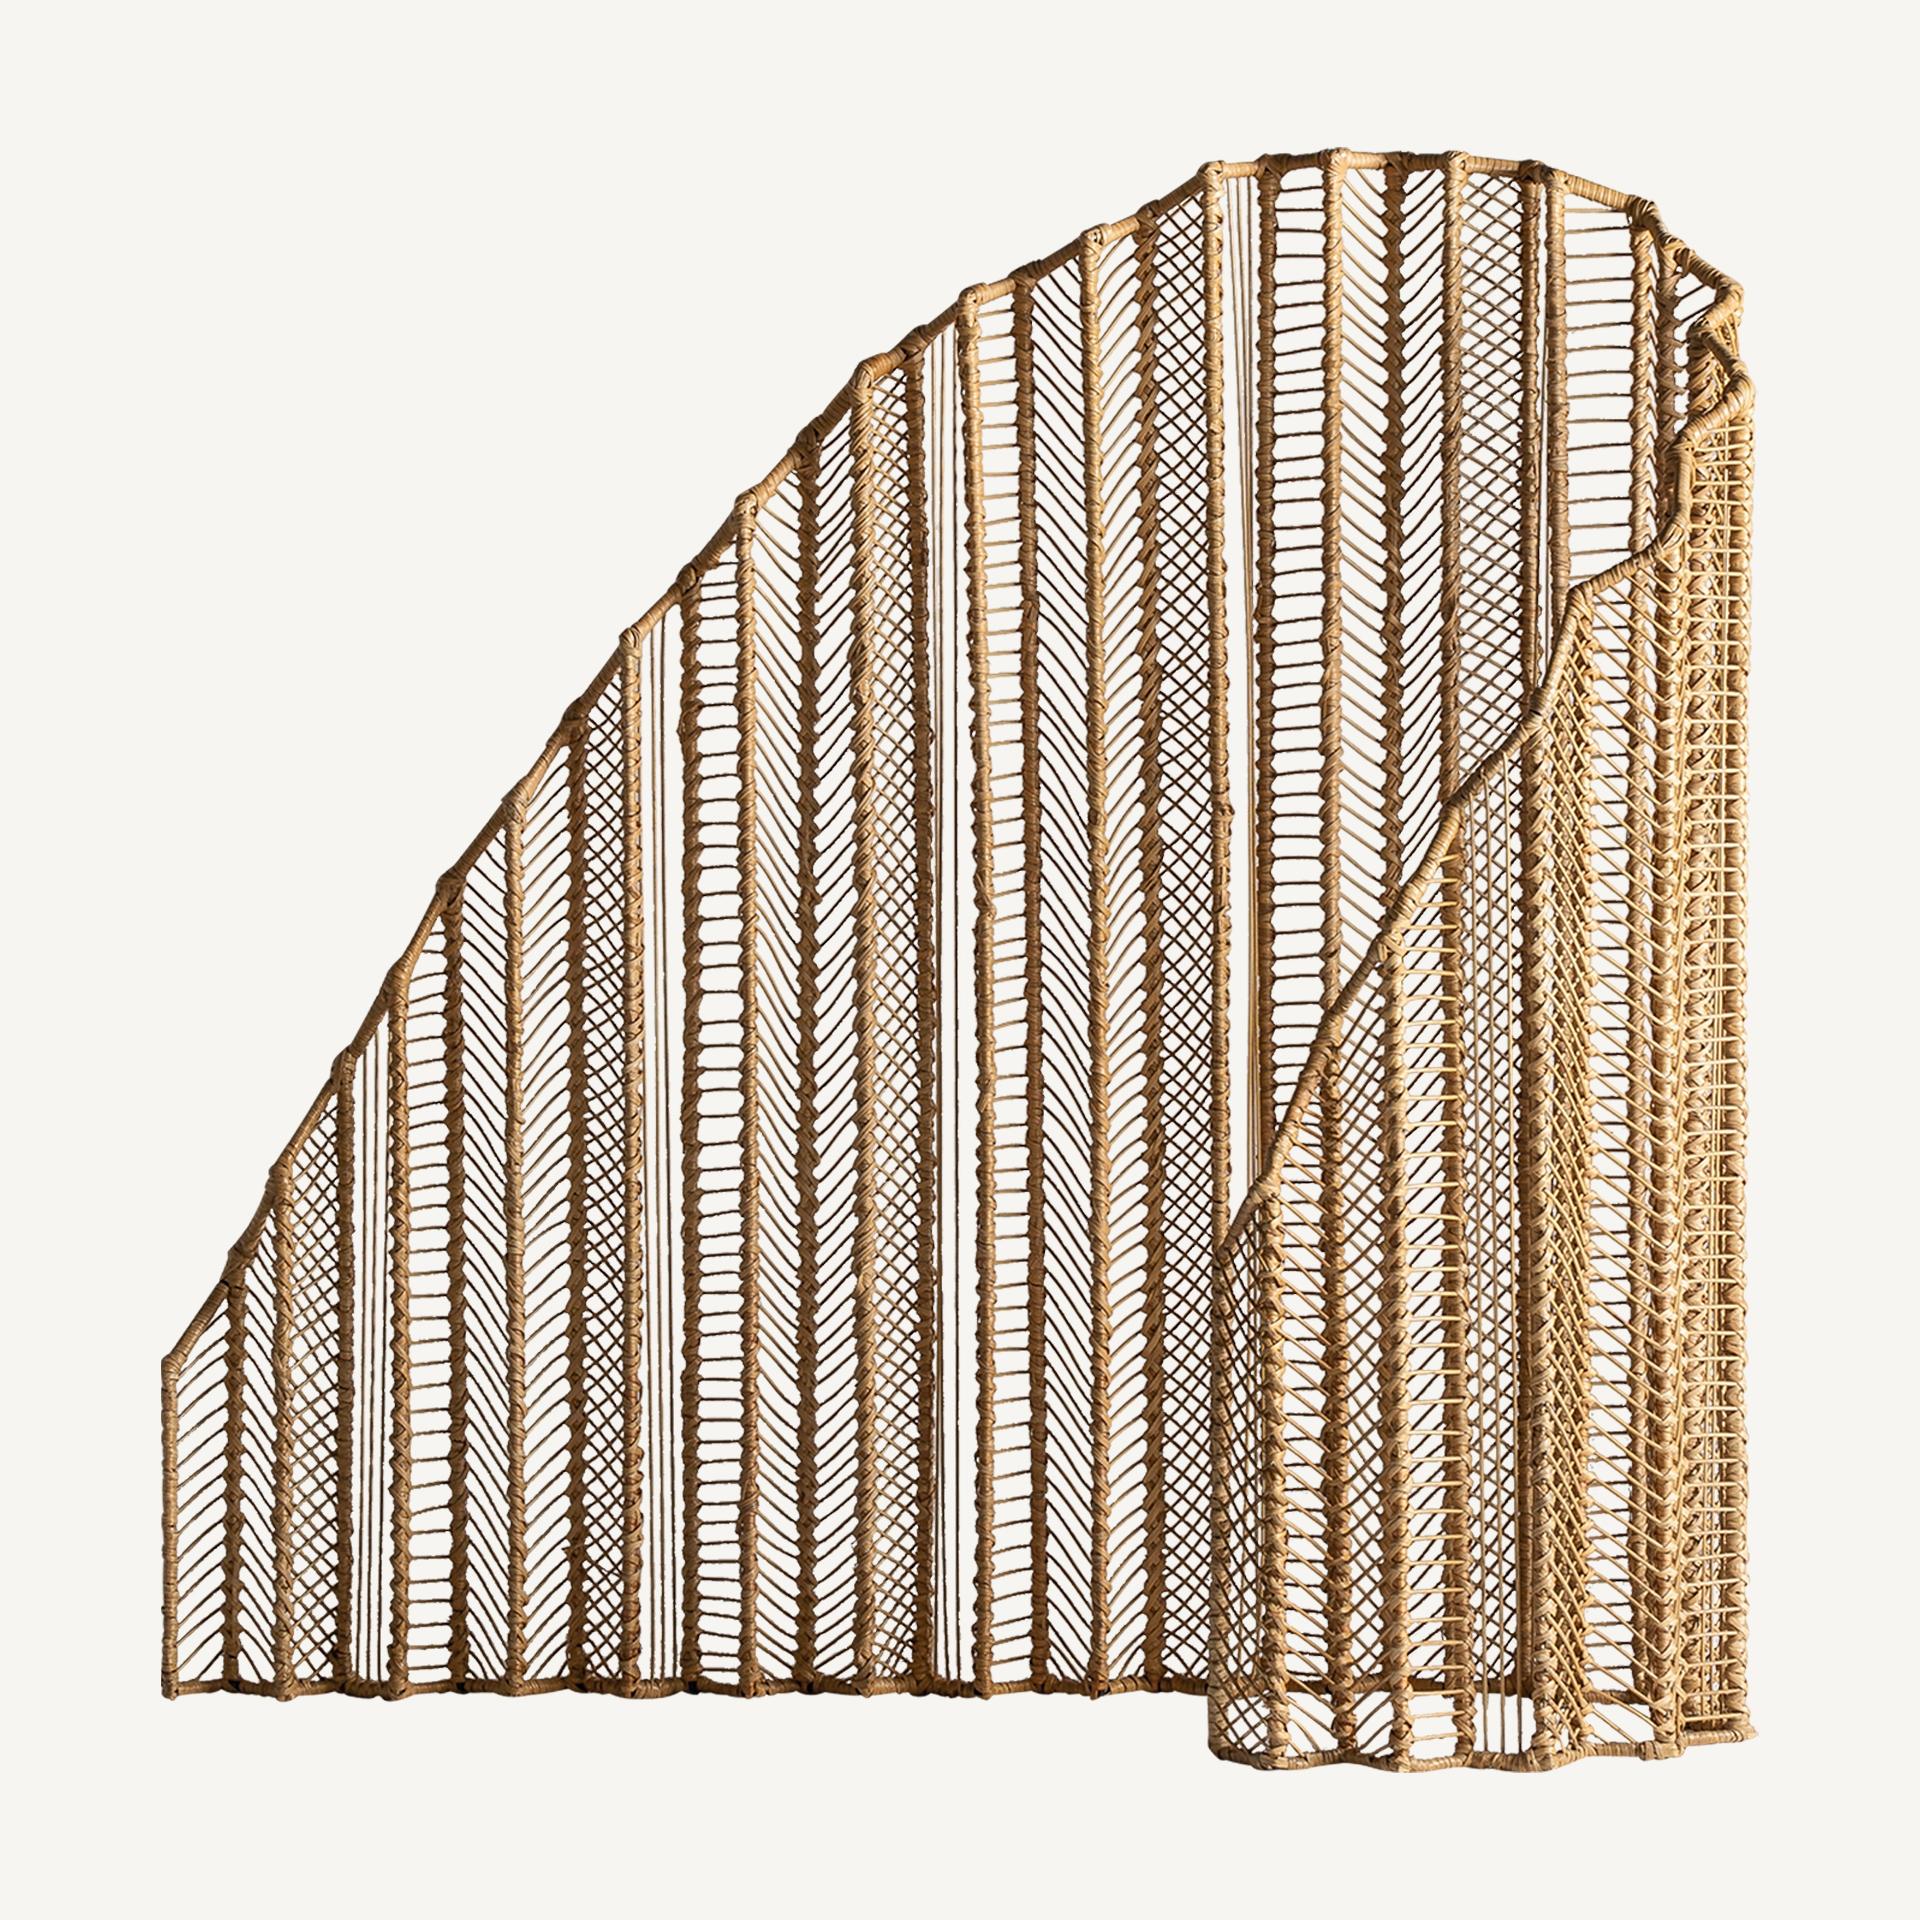 Contemporary 1950s Italian Design Style Metal and Rattan Wicker Curved Screen Divider For Sale